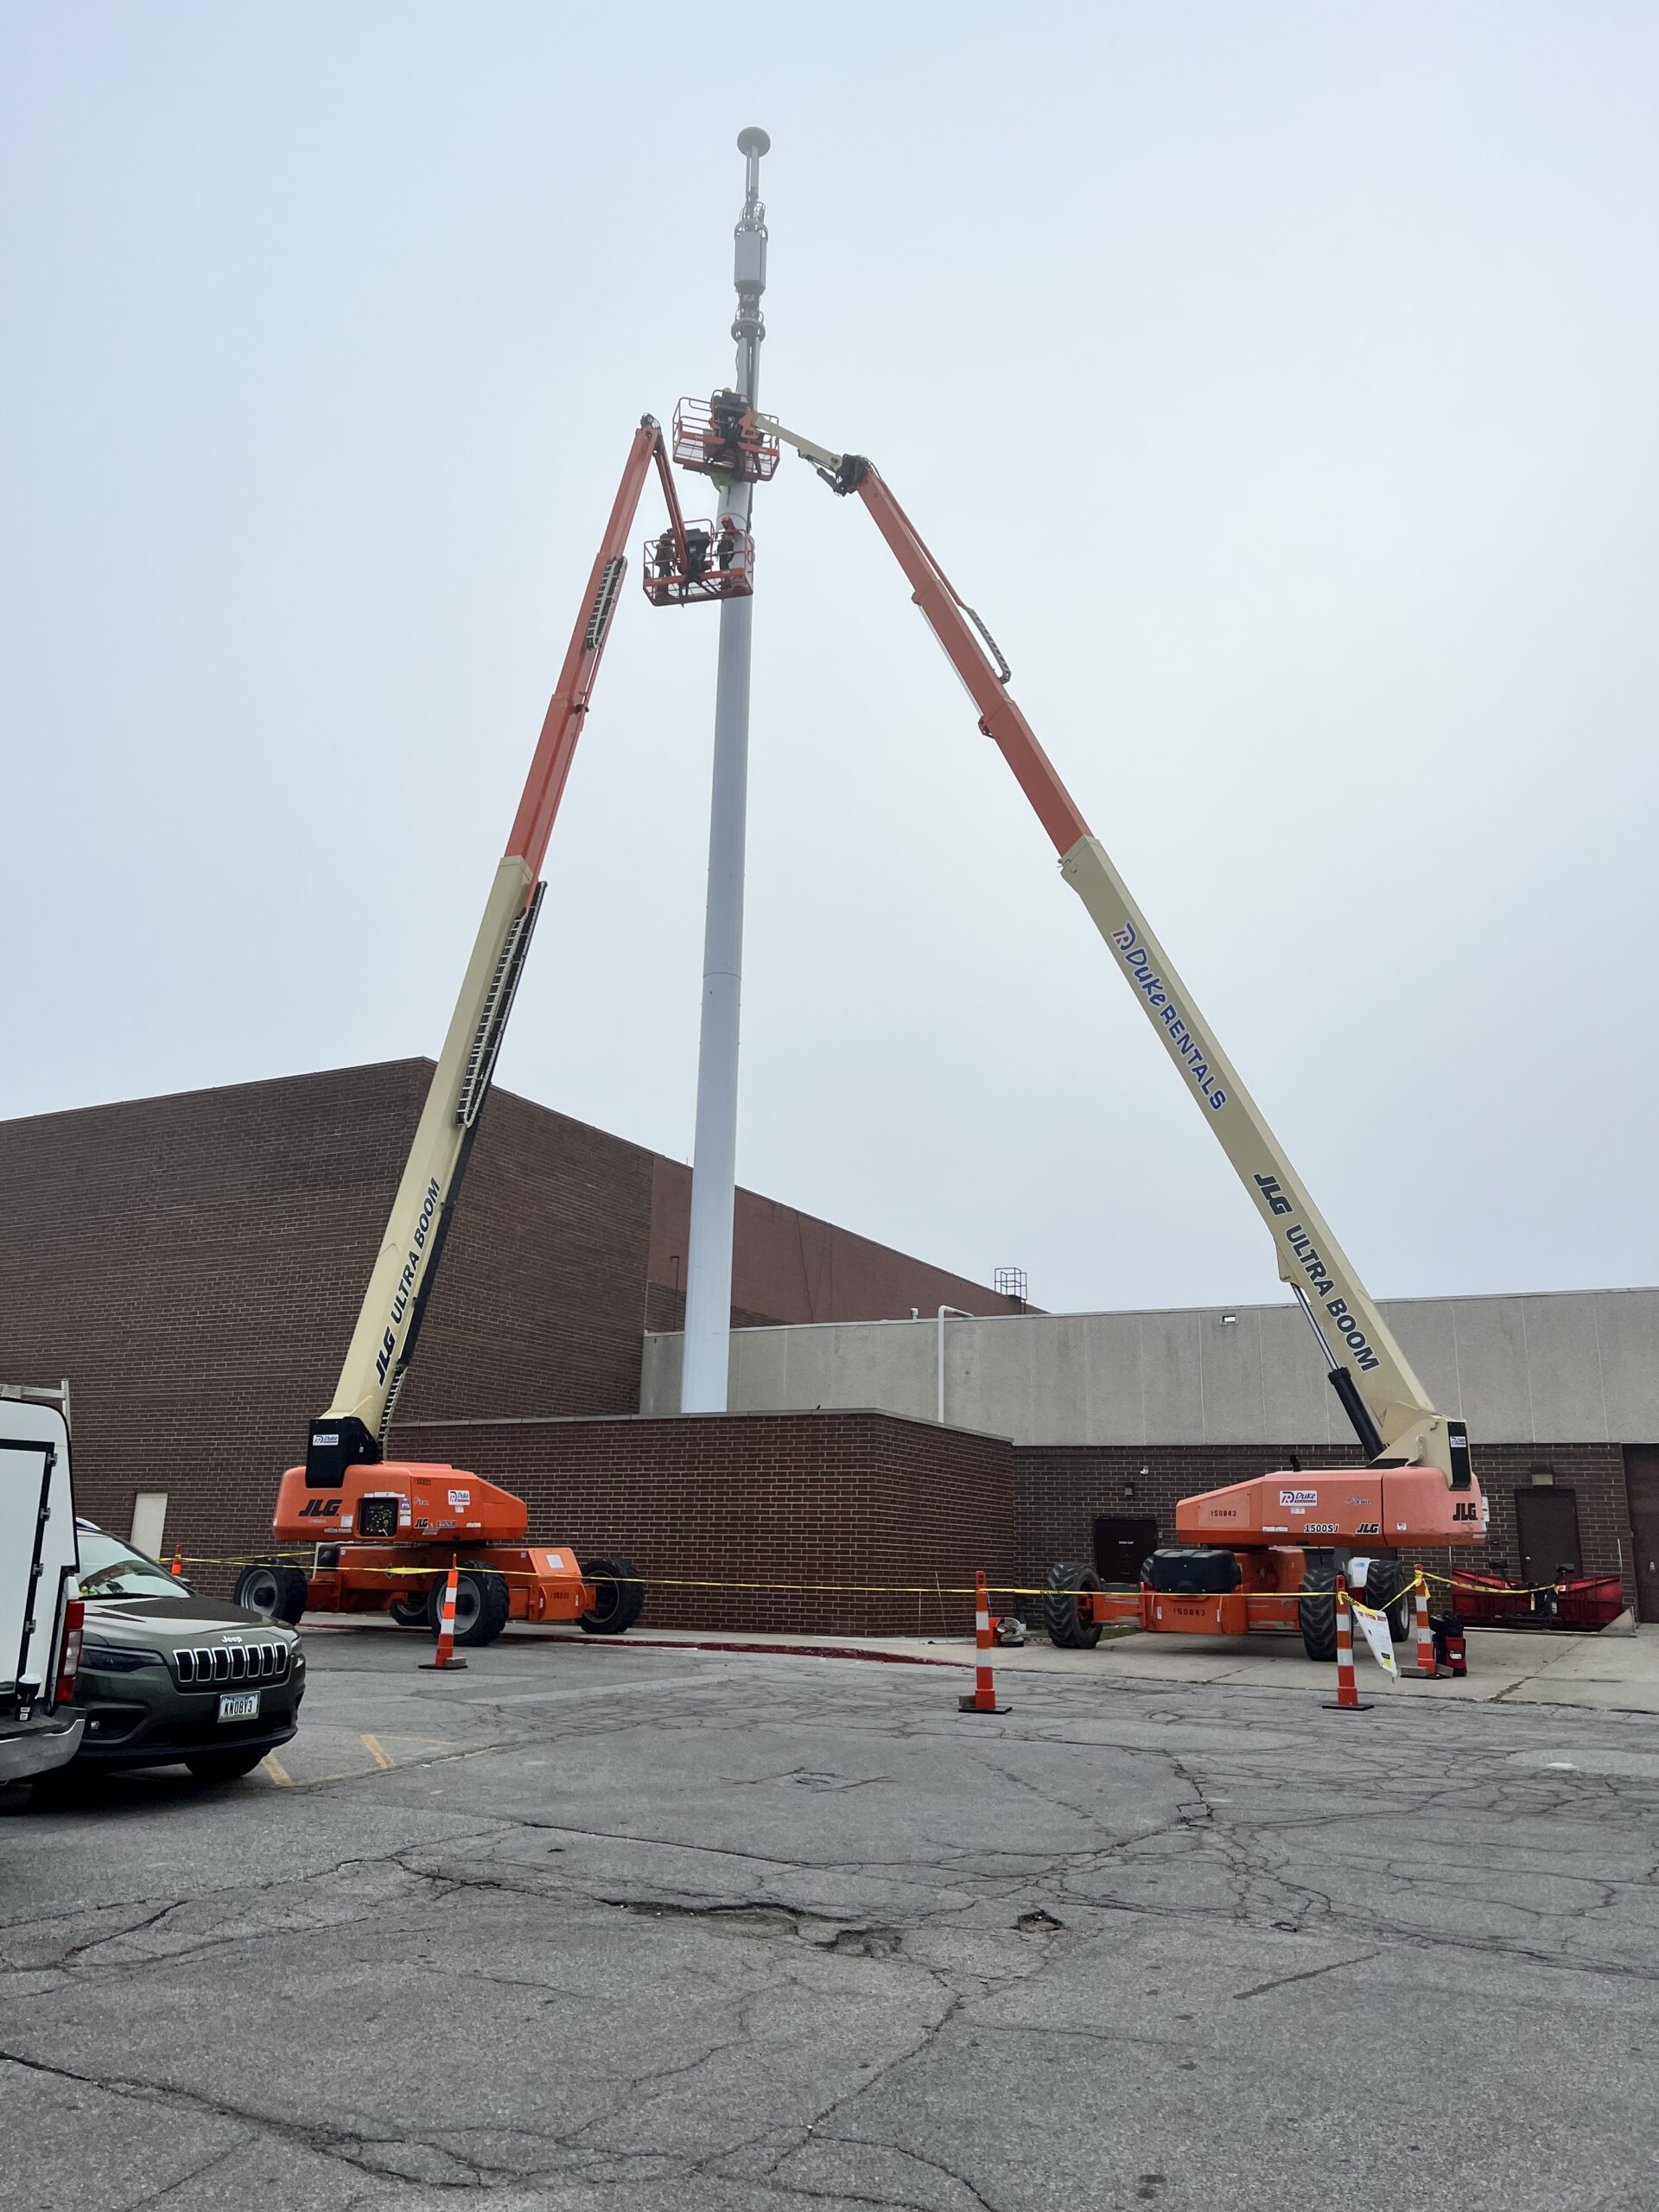 One Way Team corrects leaning wireless stealth tower in Ames, IA.